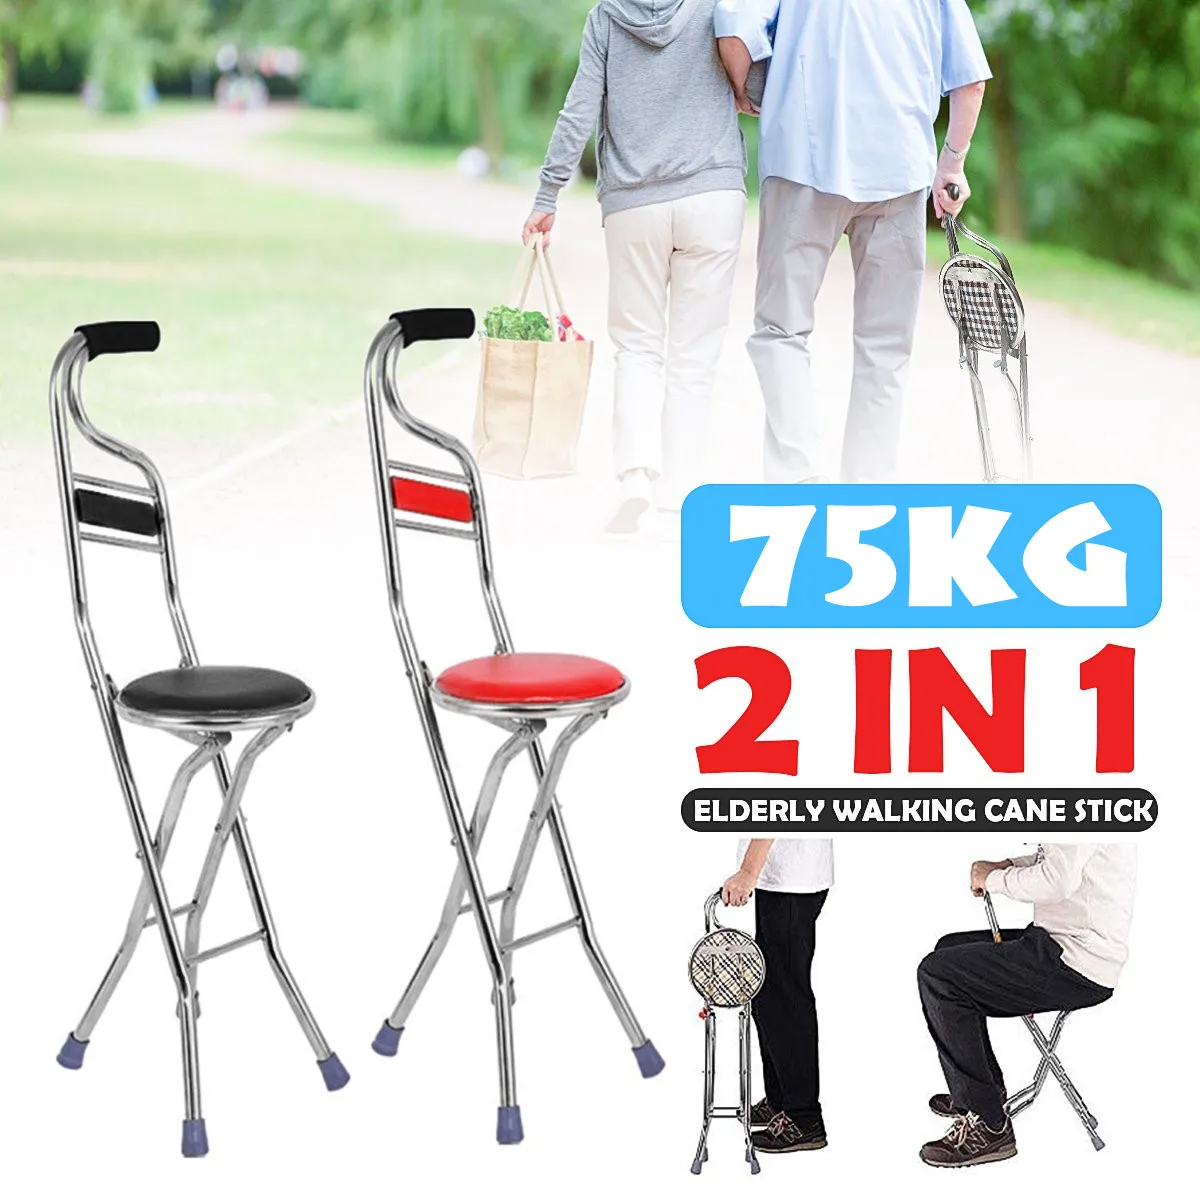 Folding Walking Cane Rest Stainless steel Walking Stick Chair Seat Non Slip Tripod Cane For Elder Outdoor Hiking Climbing Crutch